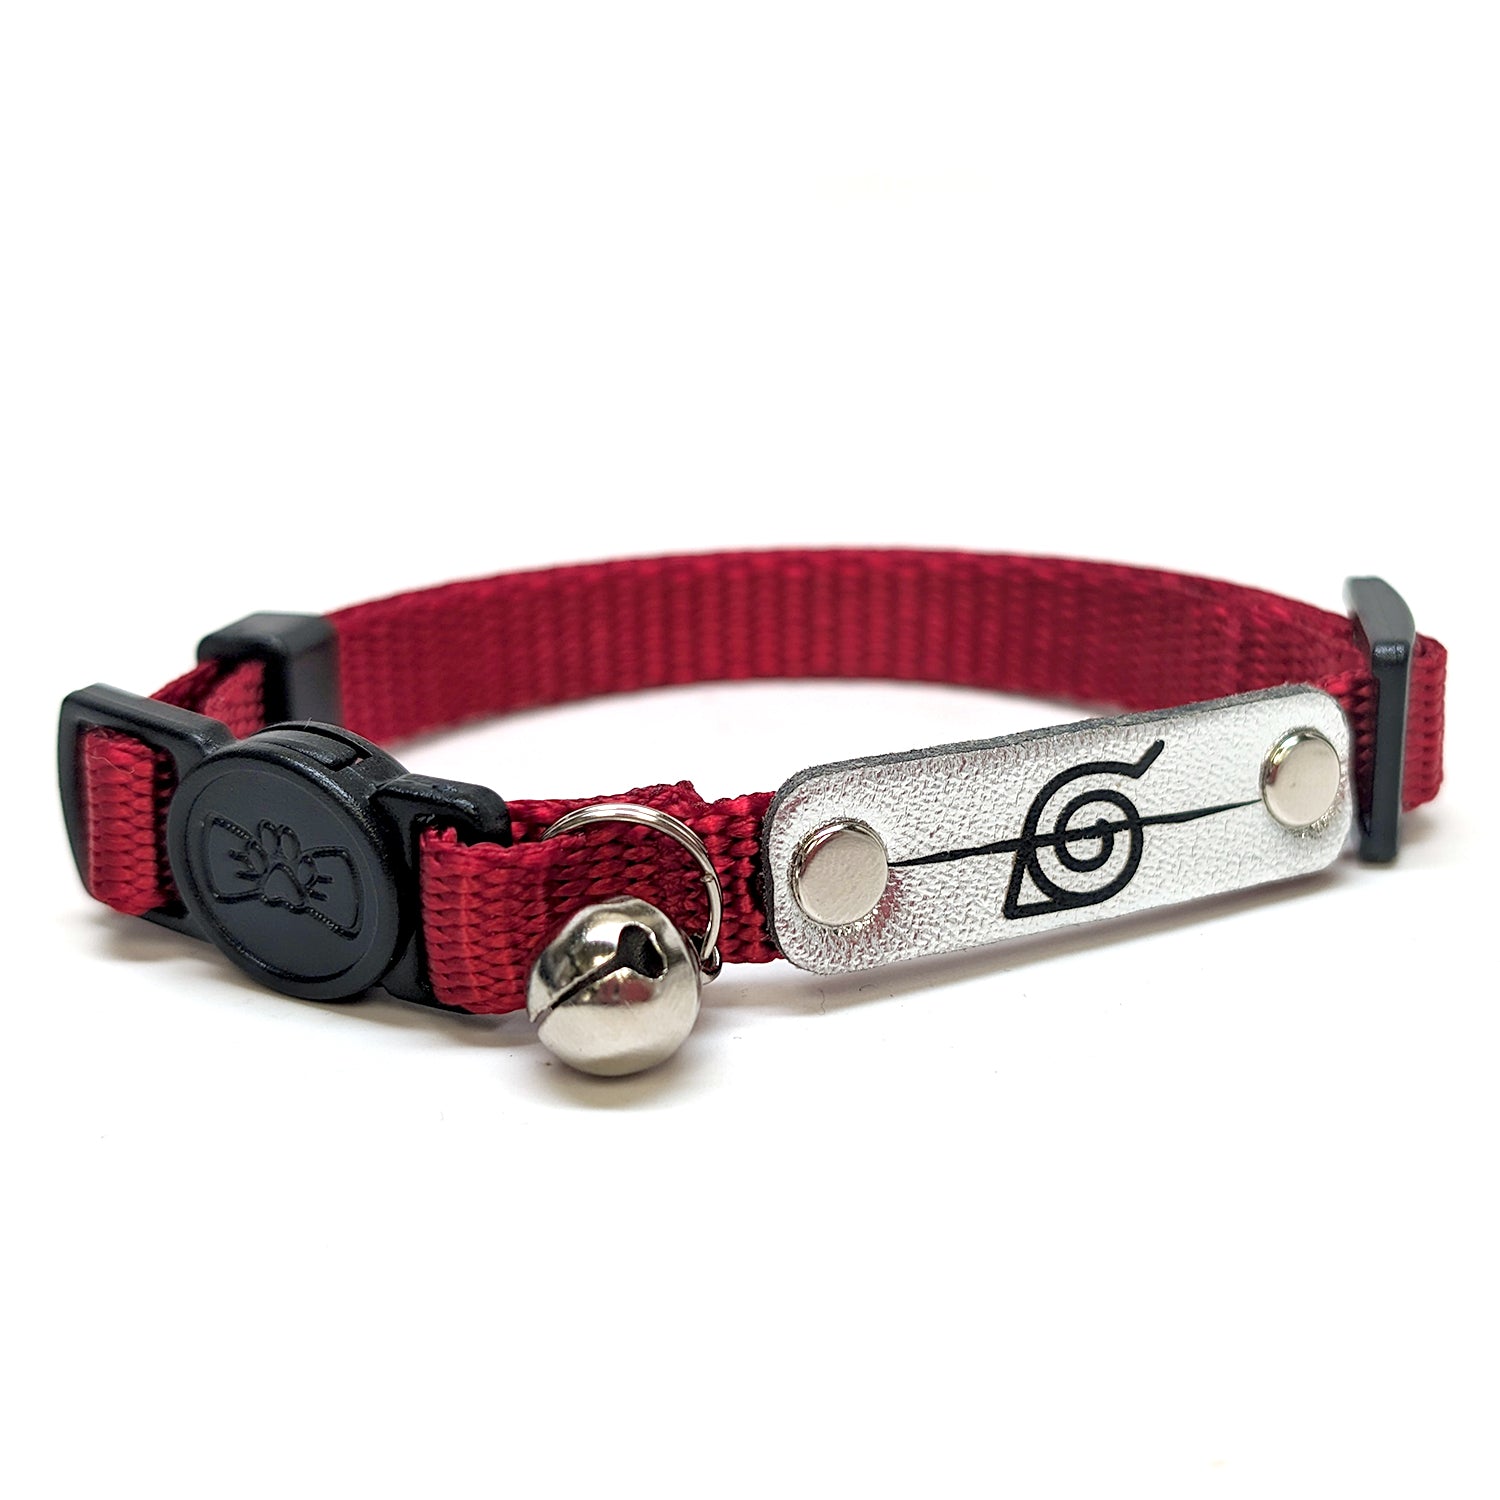 Naruto Shippuden x Pawsonify - Officially Licensed Rogue Ninja Collar (Red) for Cats #size_Cat: 8.5-12